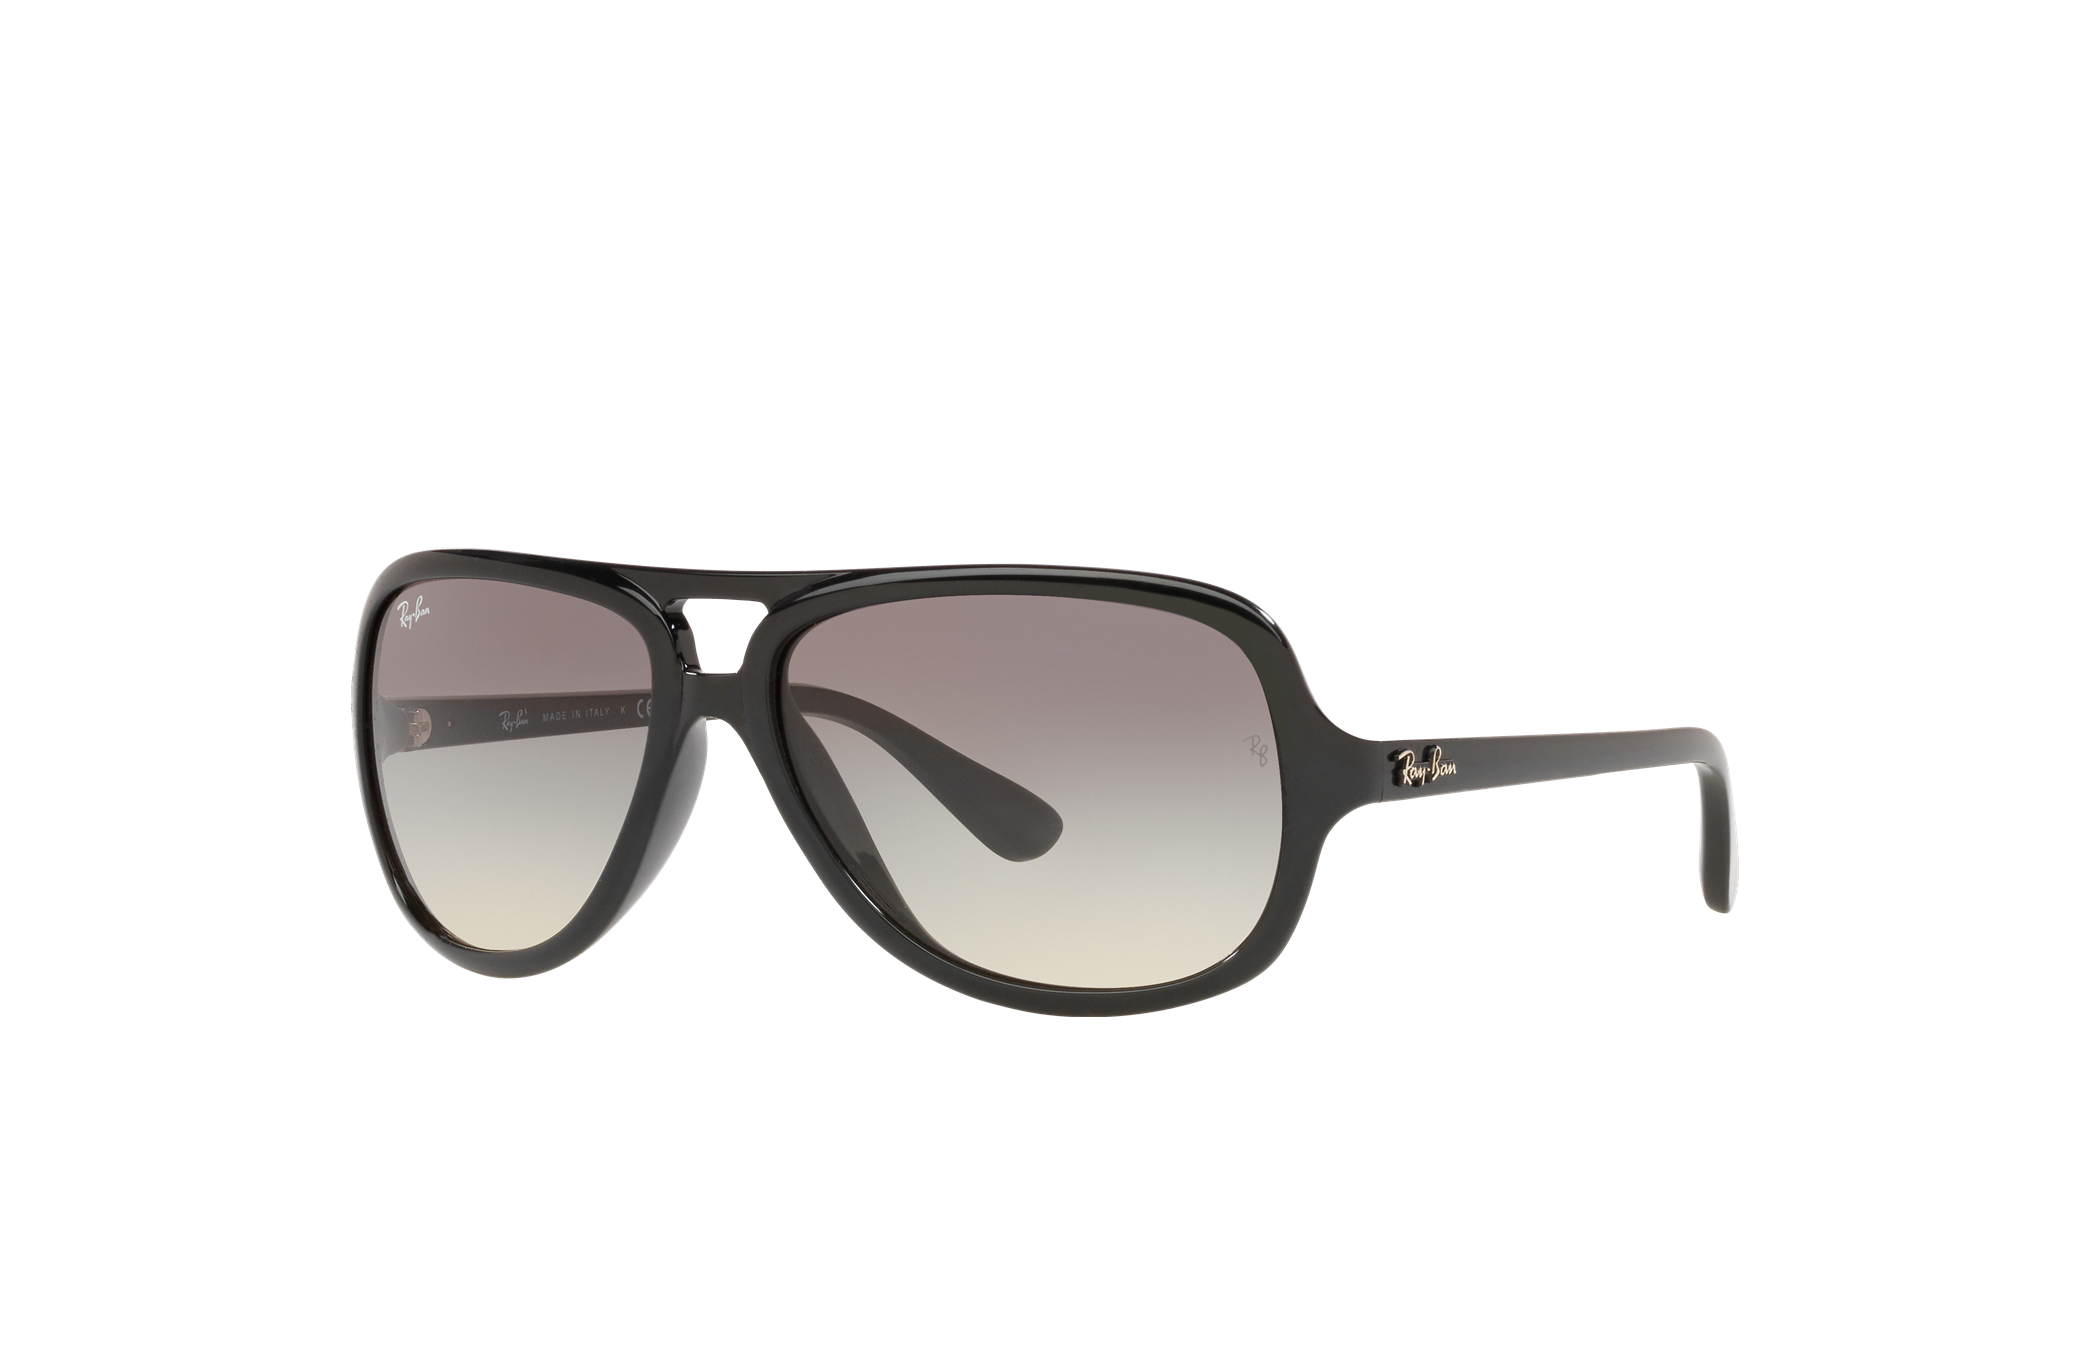 Rb4162 Sunglasses in Black and Dark Grey | Ray-Ban®